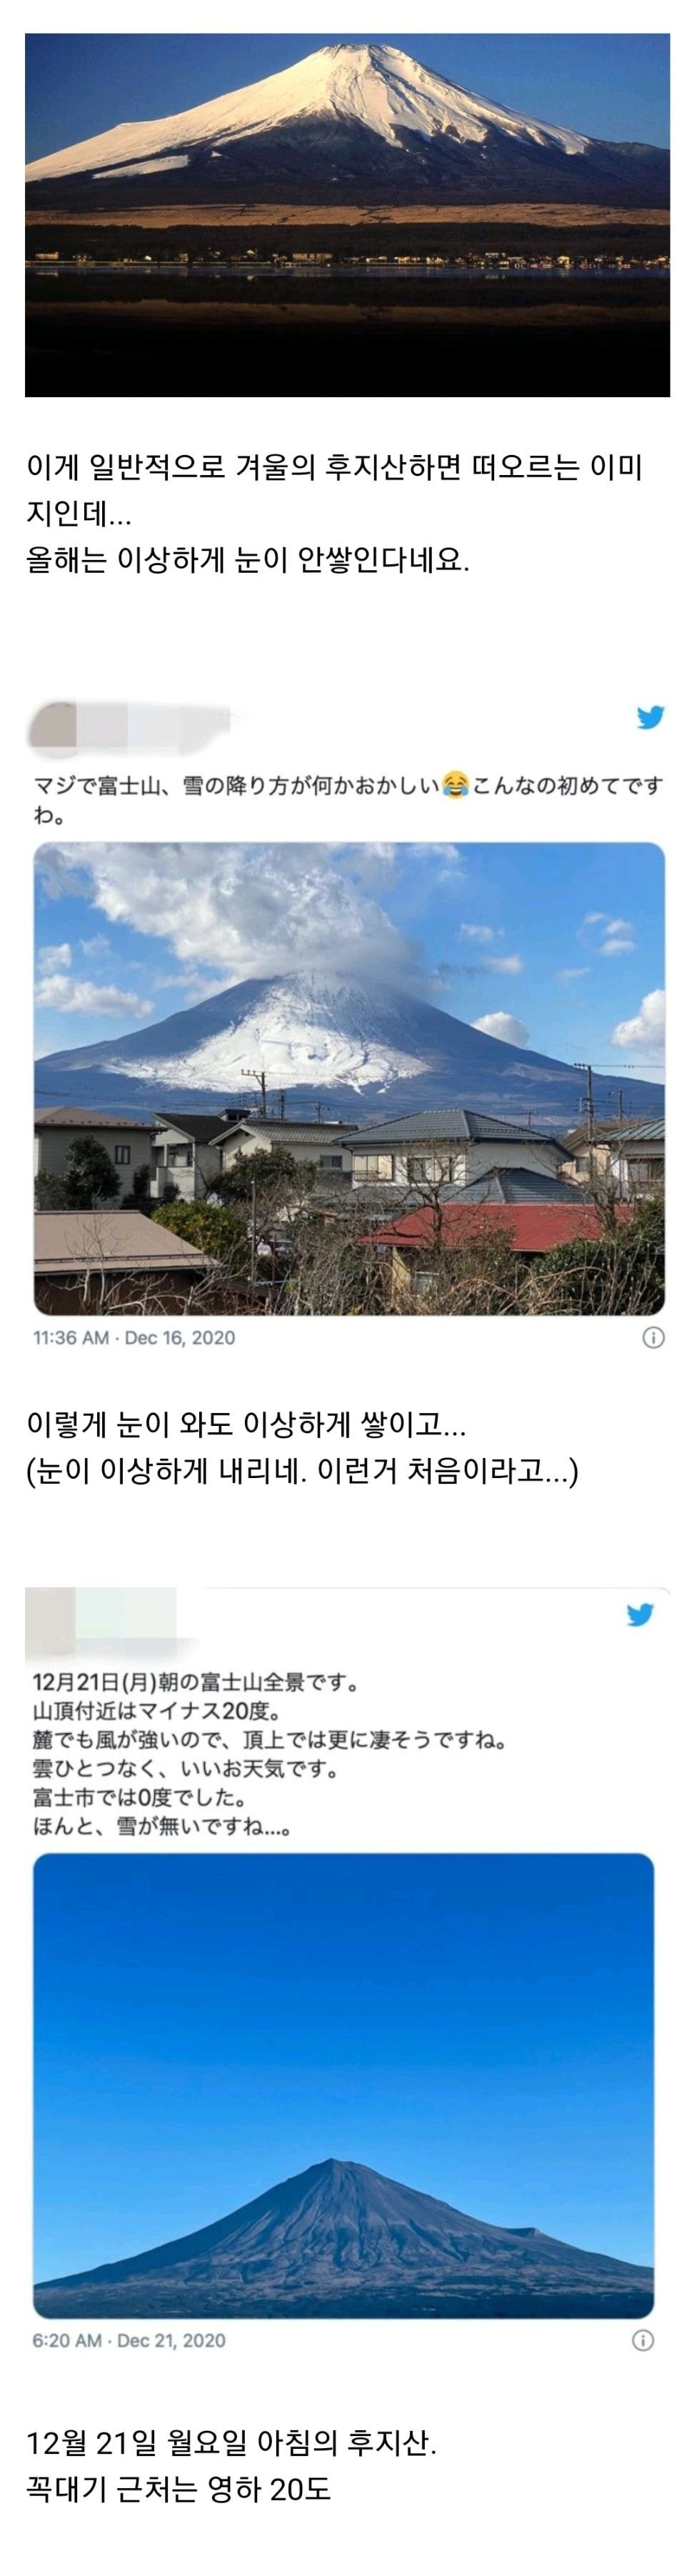 Strangely, snow will not accumulate on Mount Fuji in Japan this year.